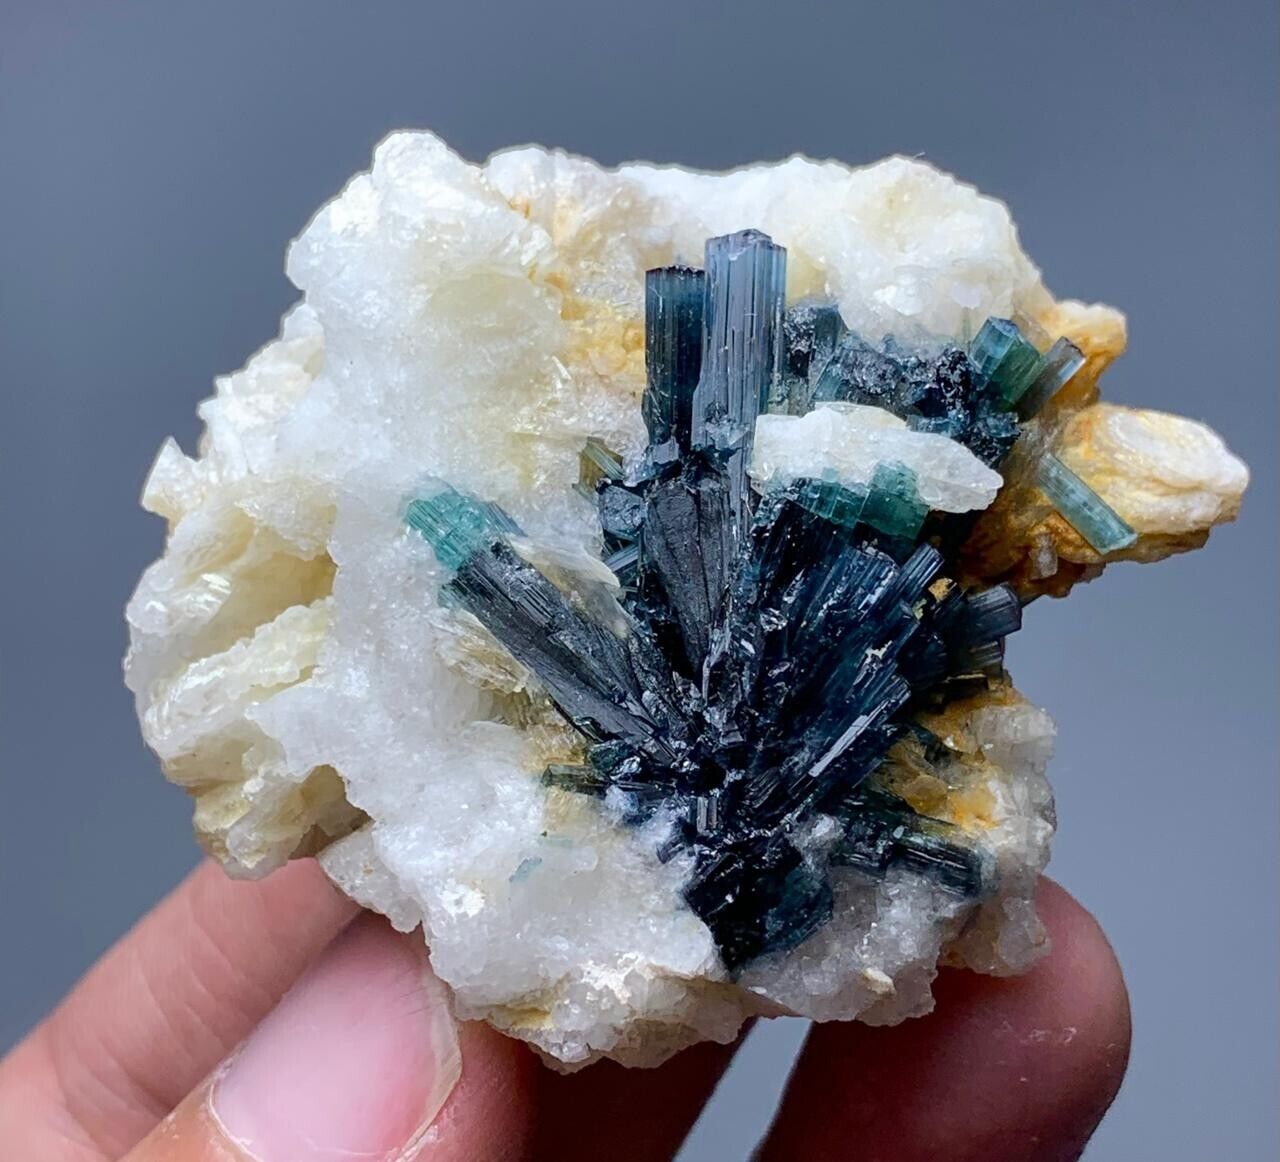 294 Cts Indicolite Tourmaline Crystals Bunch Specimen From Afghanistan